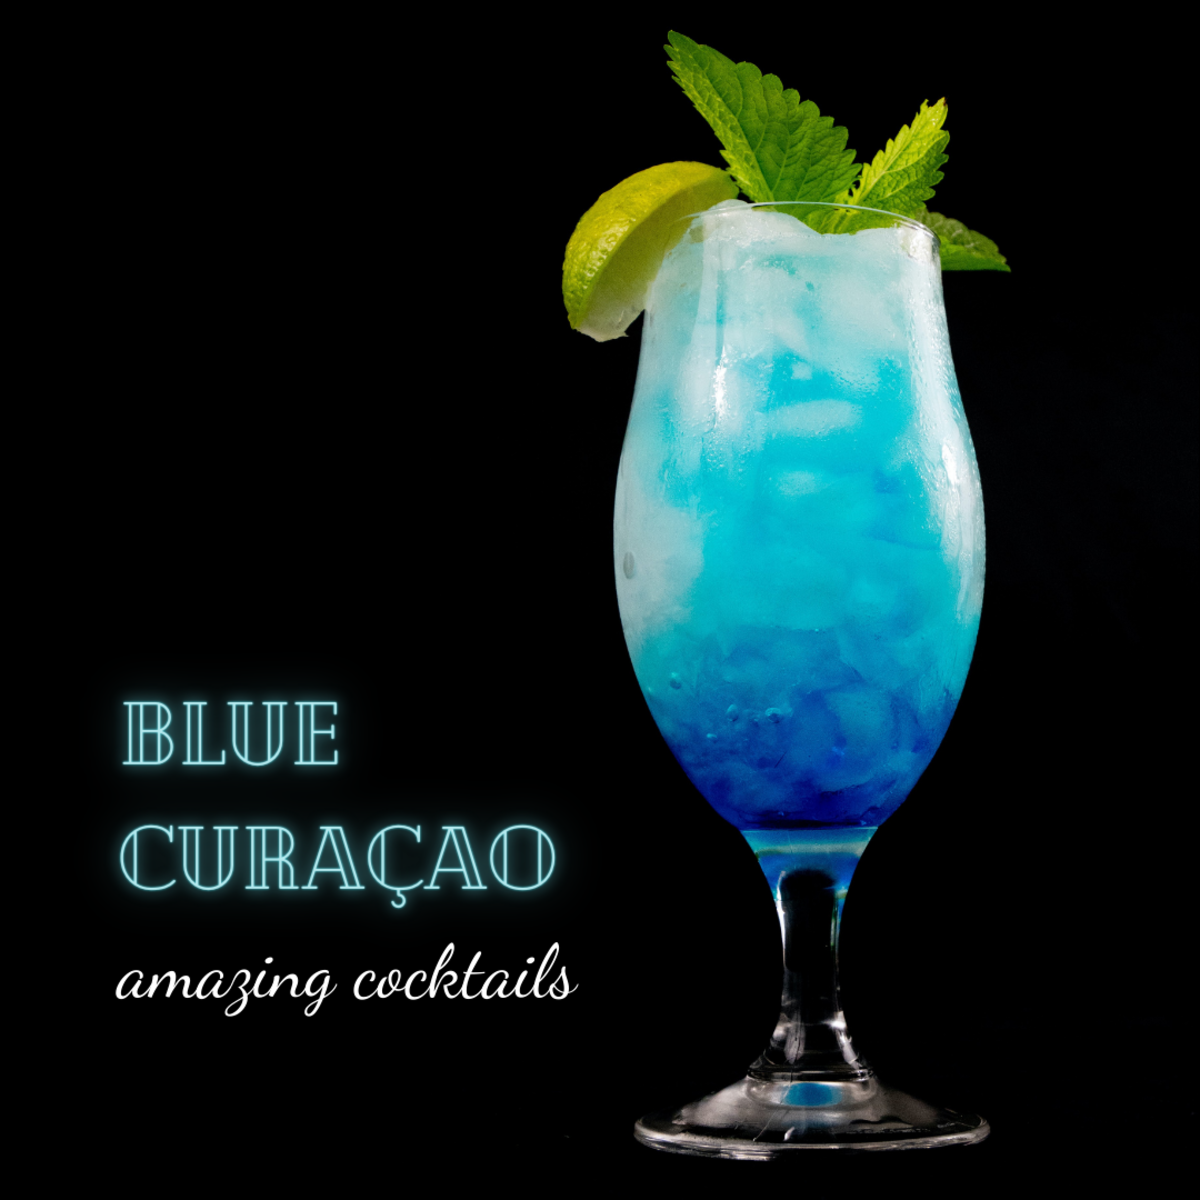 10 Delicious Blue Curaçao Cocktails That Will Wow Your Guests